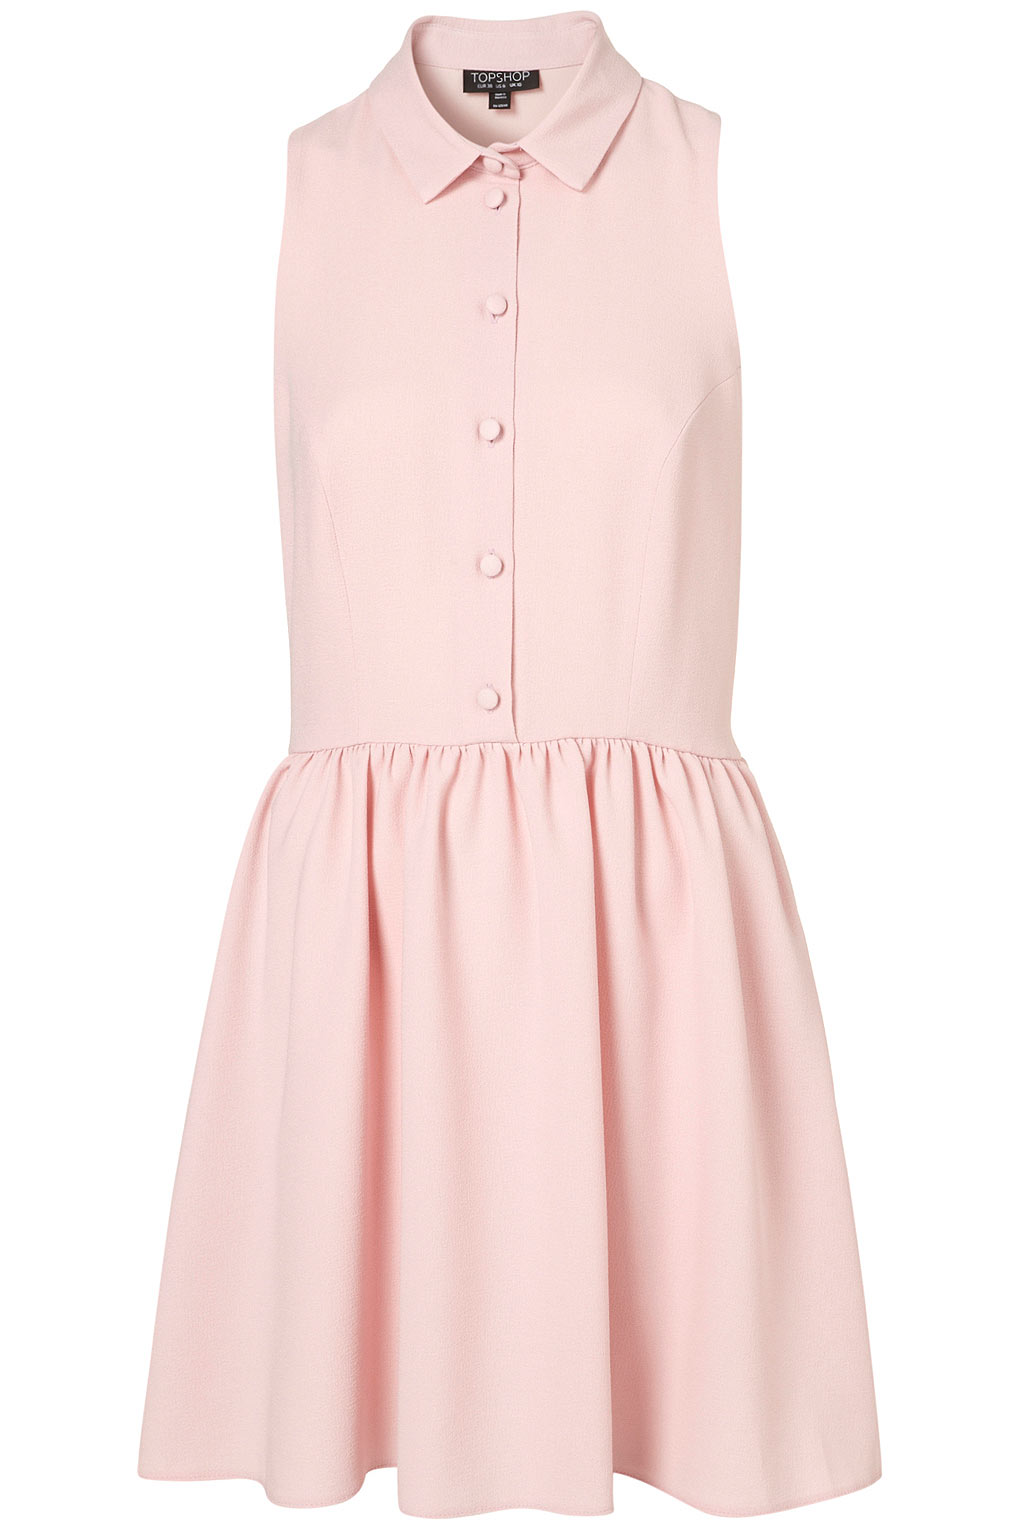 TOPSHOP Crepe Shirt Dress in Pale Pink (Pink) - Lyst